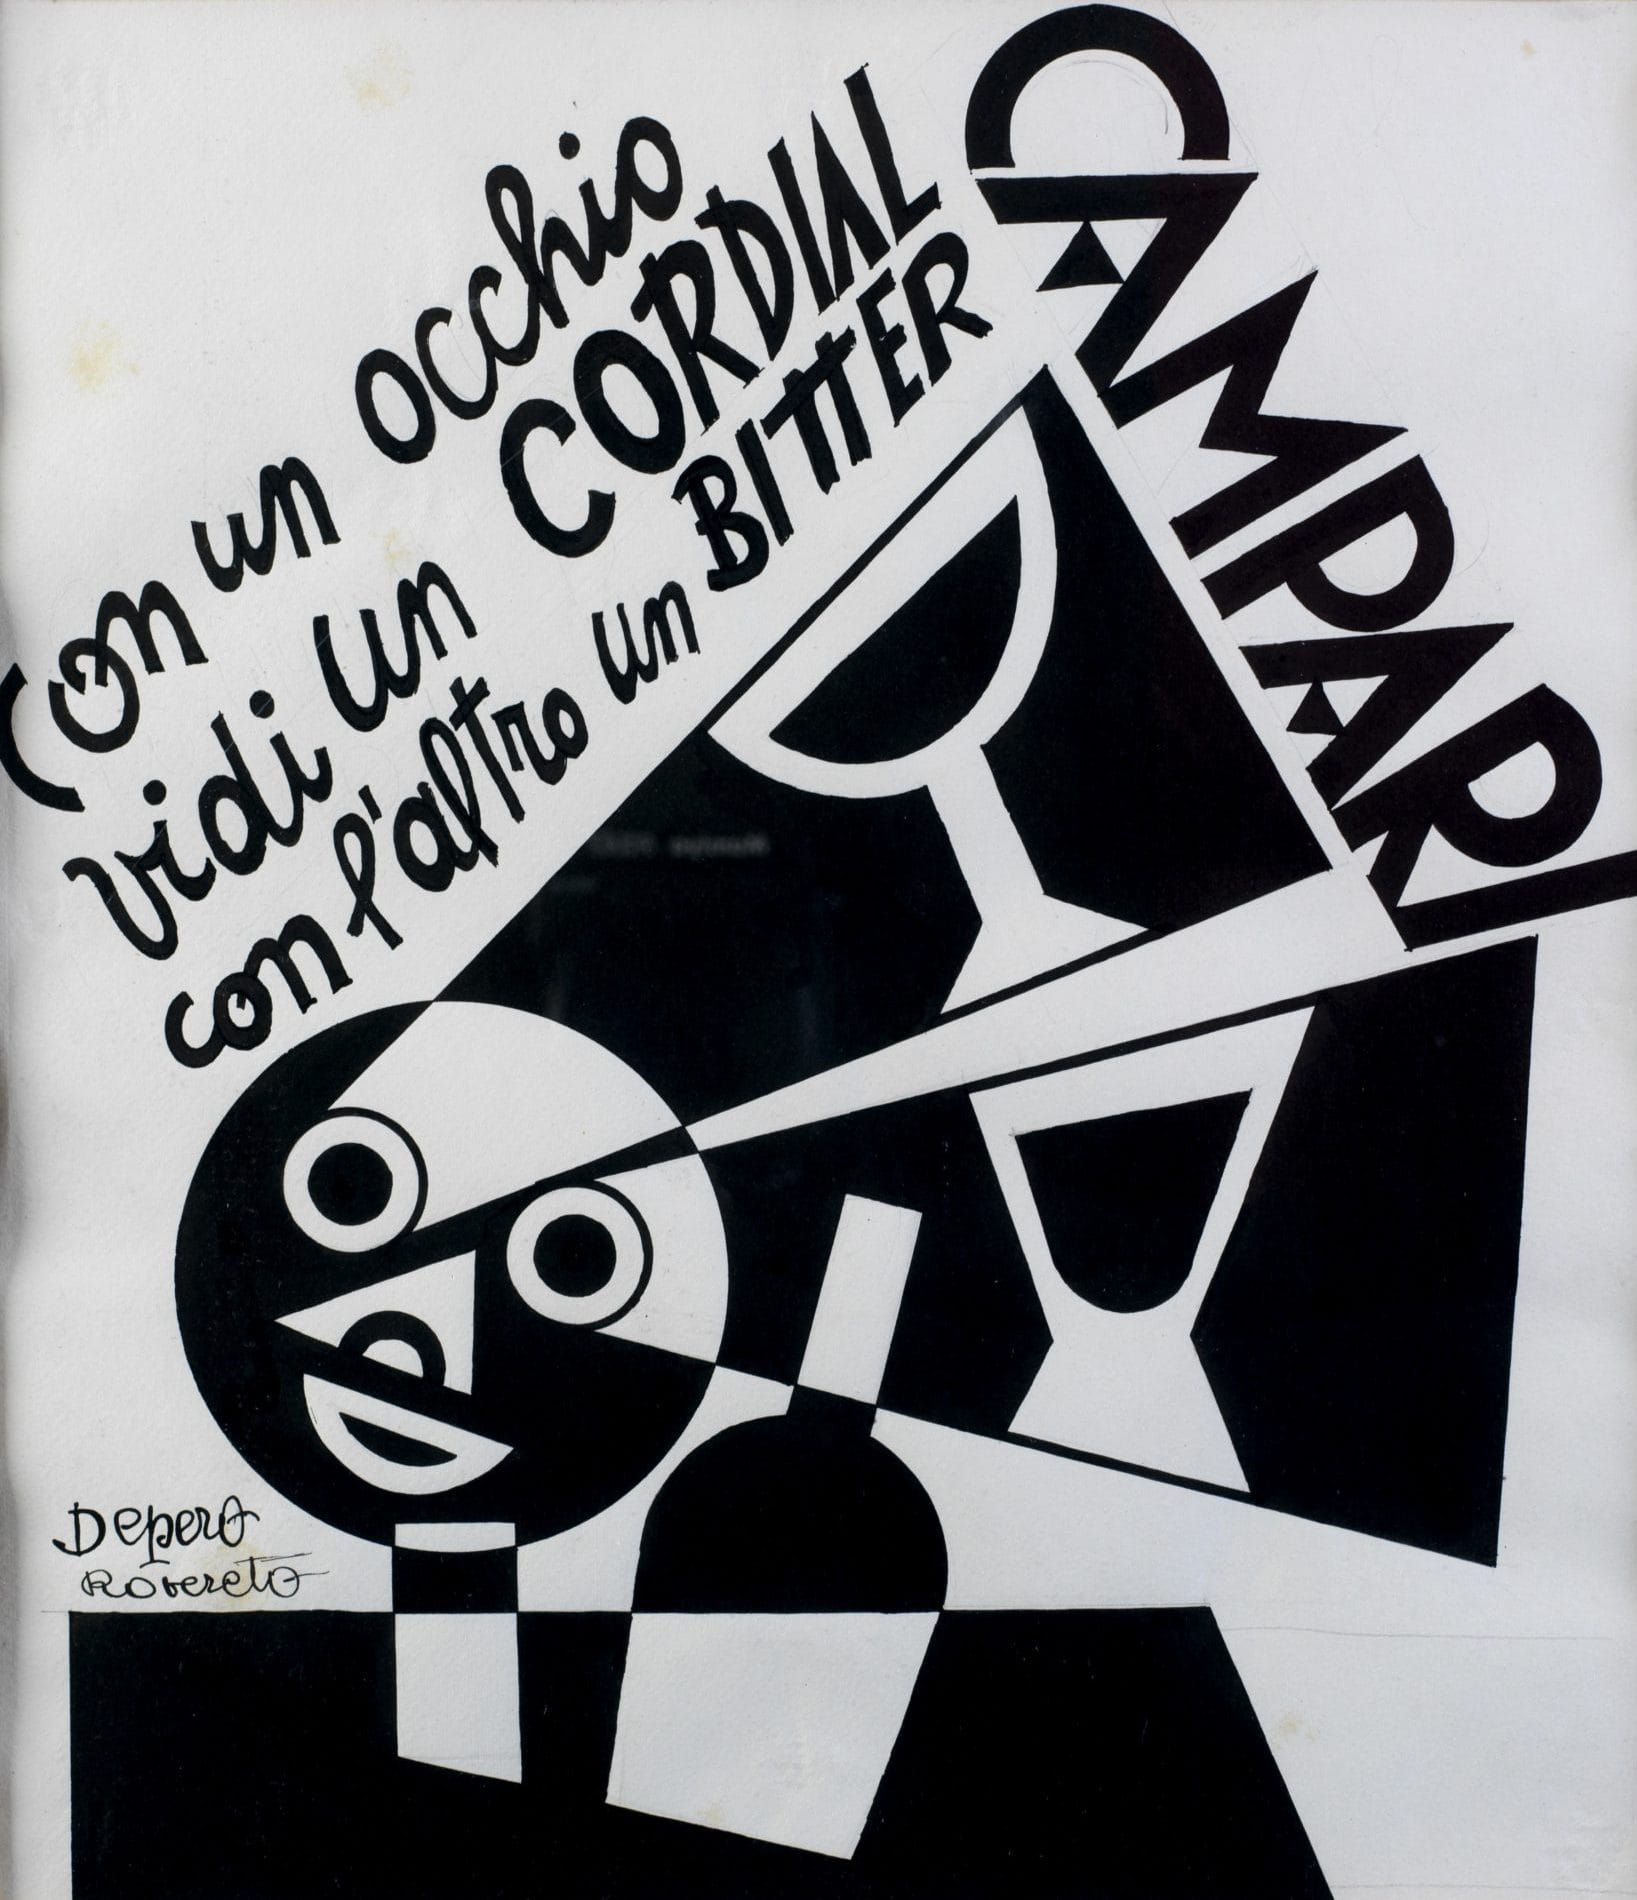 With one eye I saw a Cordial, with another a Bitter Campari, 1928, Fortunato Depero